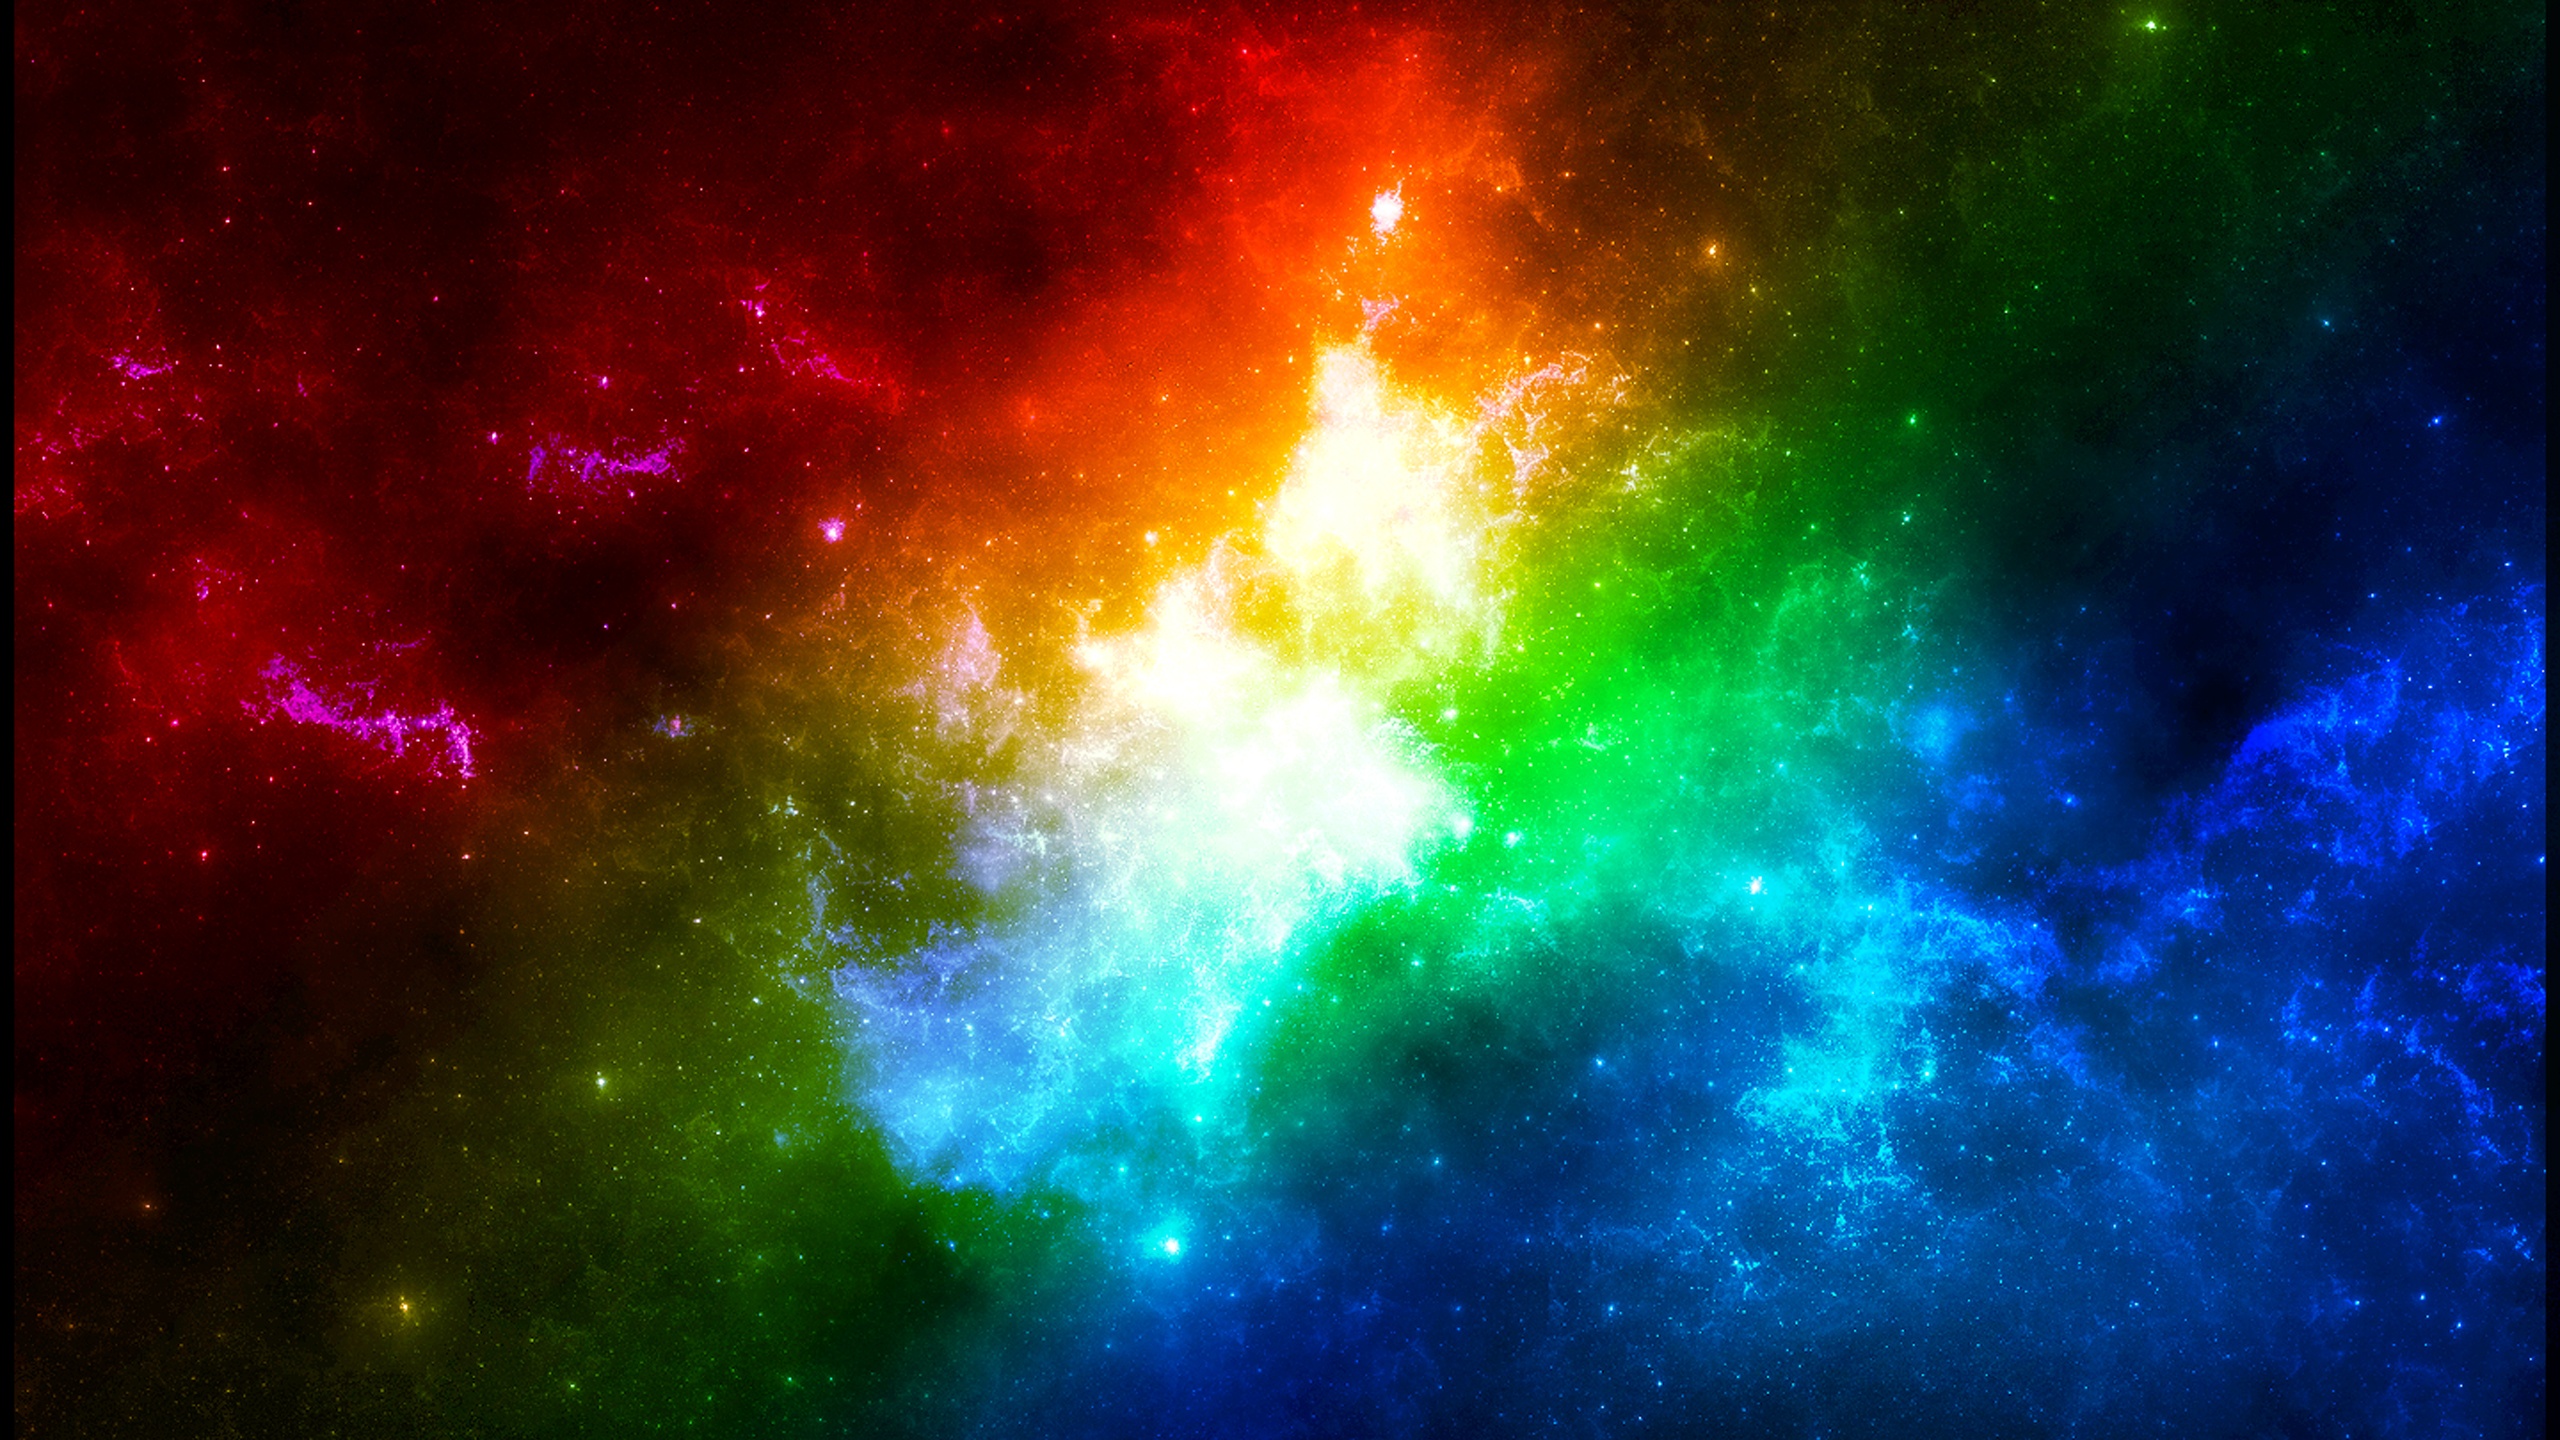 Hd Space Backgrounds 1080p - HD Wallpaper 